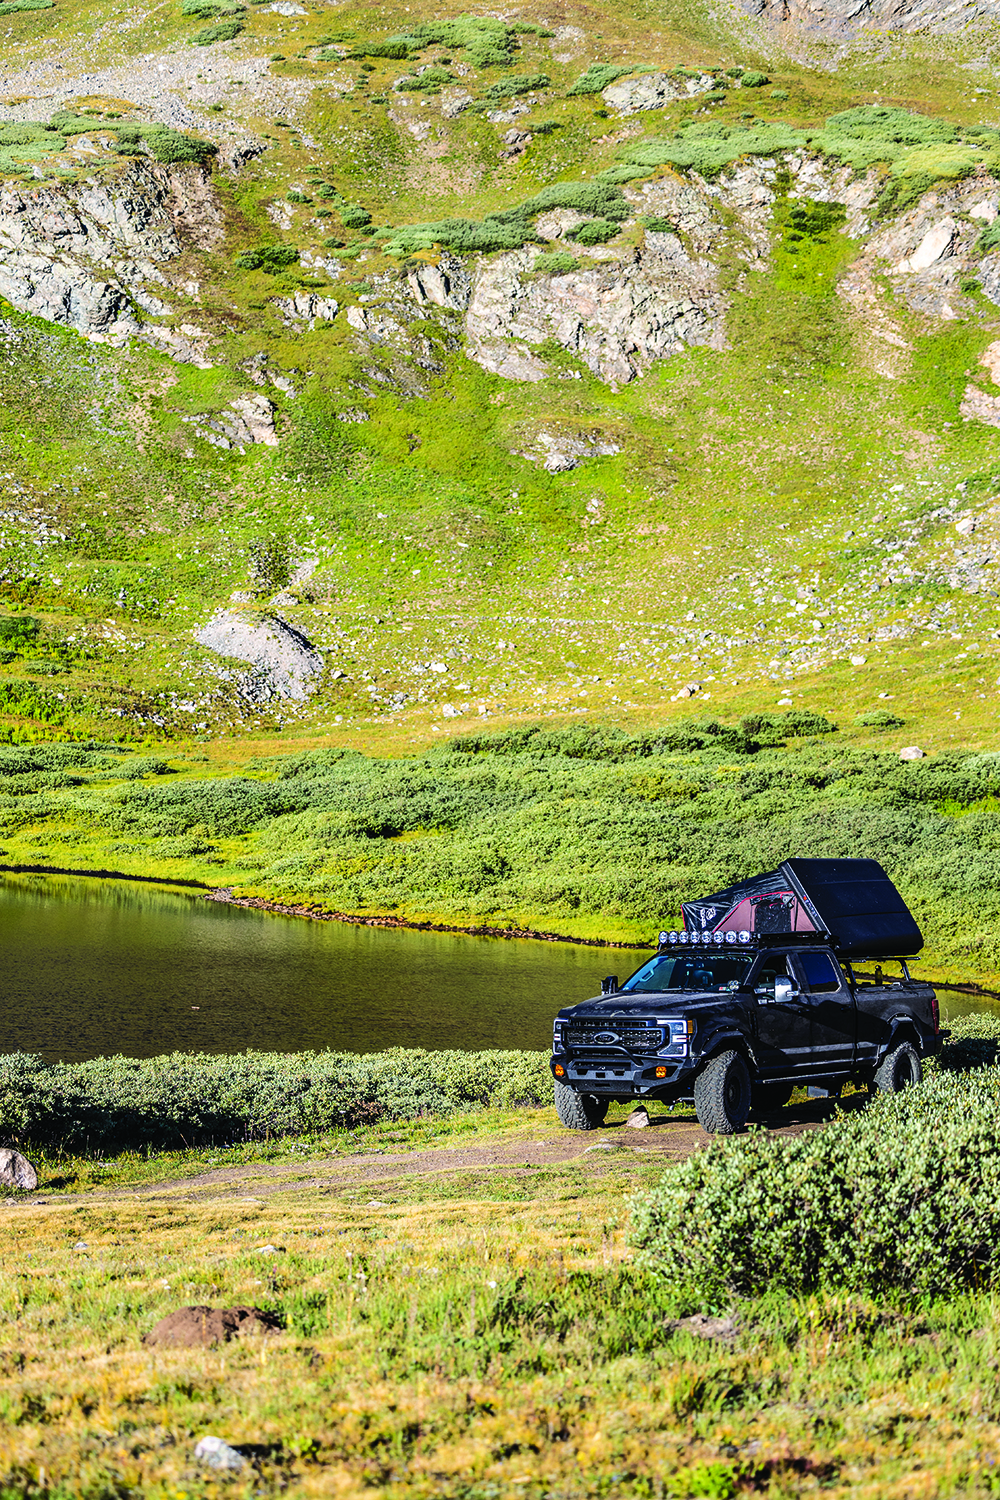 Mike pops up F250 Tremor's RTT when he's ready to camp out.